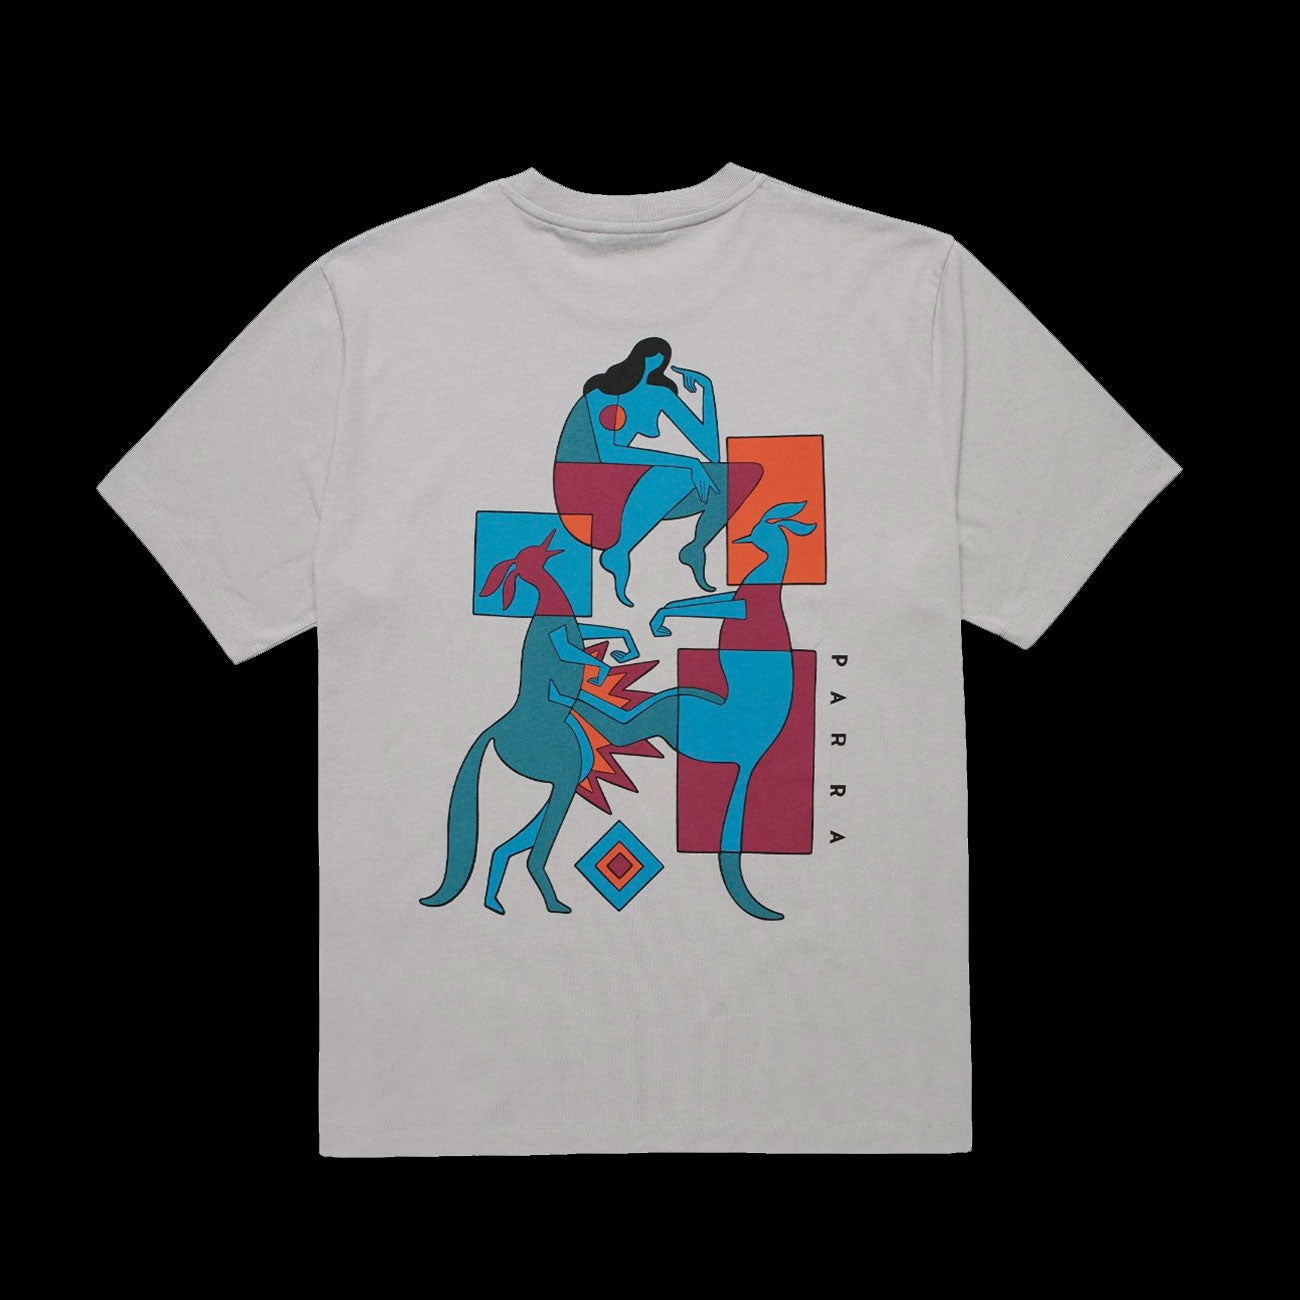 By Parra Down Under T-Shirt (Alloy Grey)